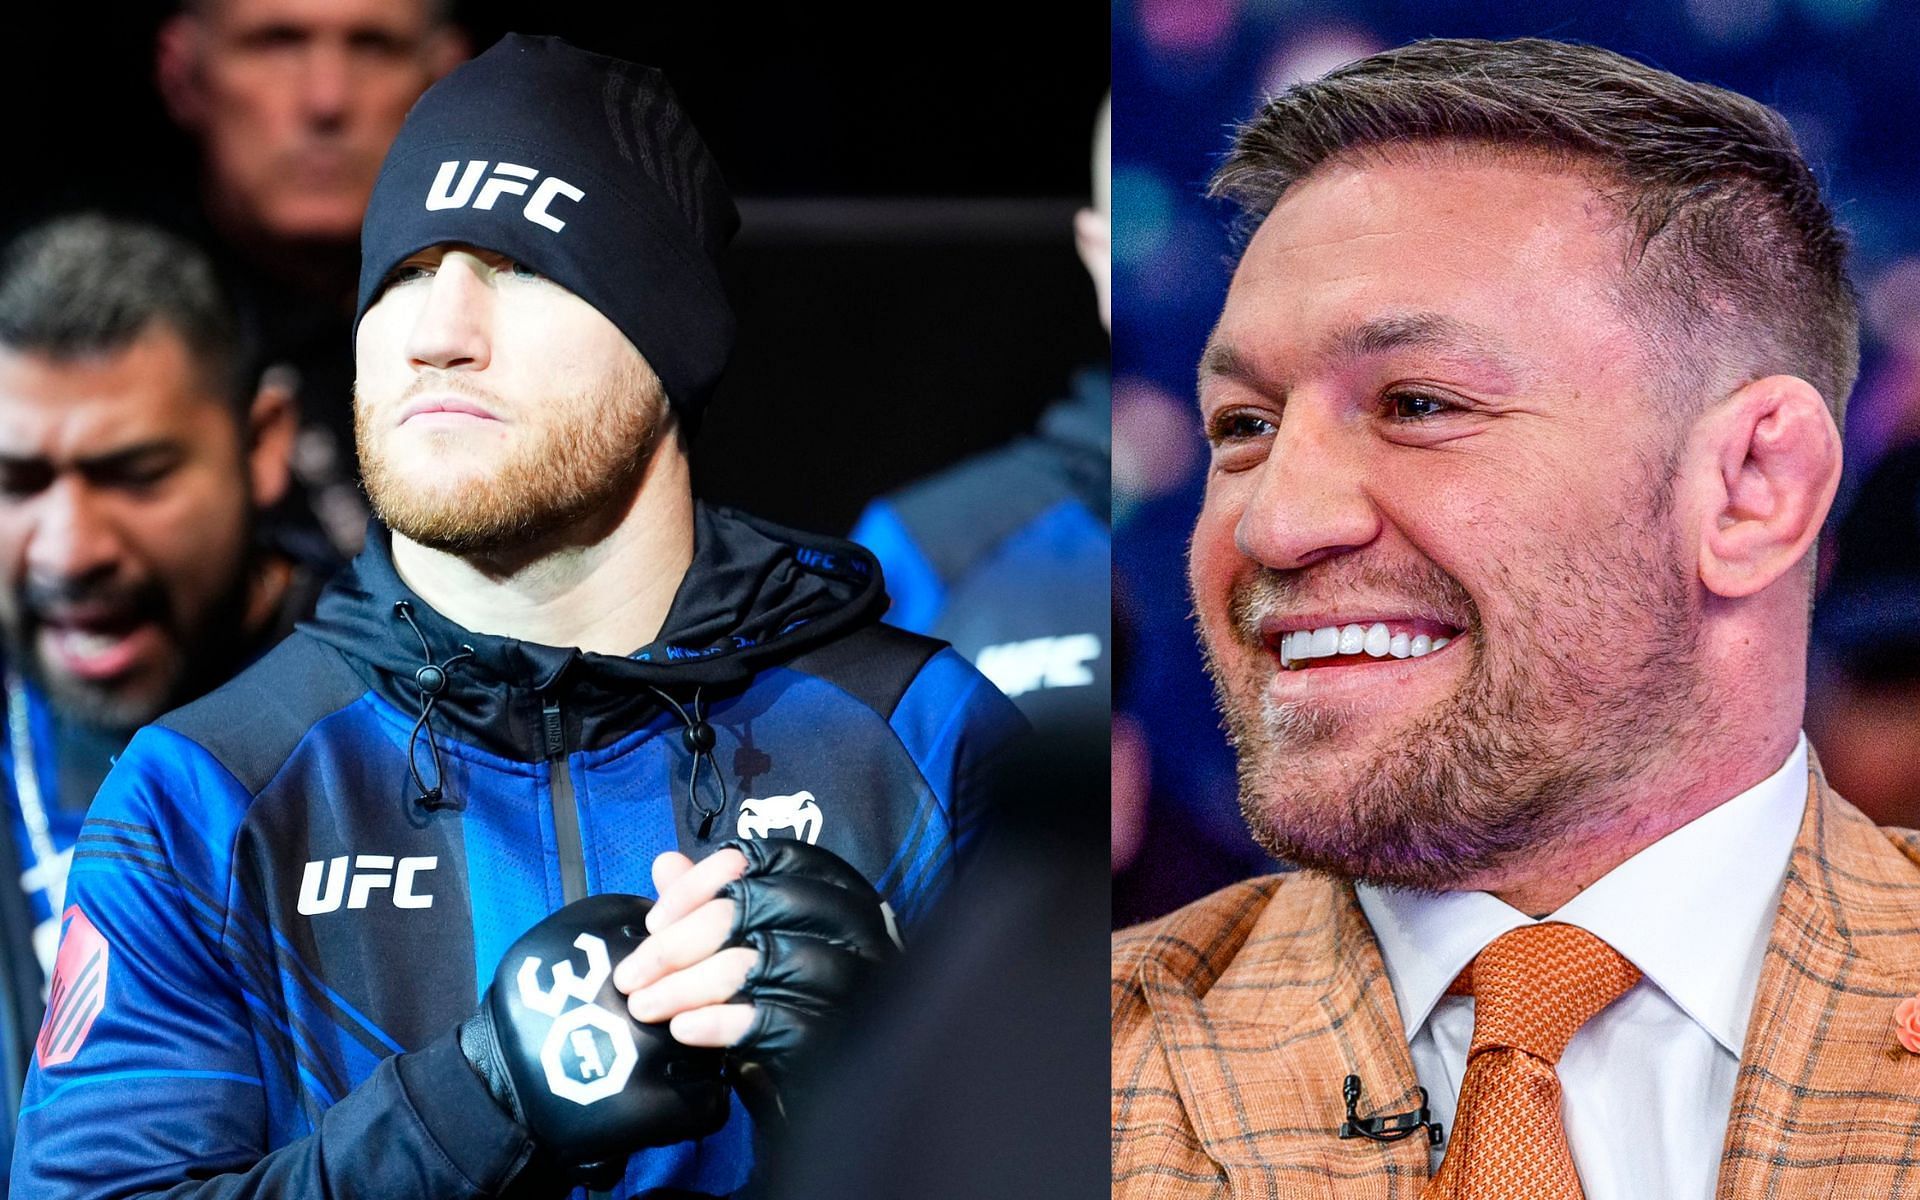 Justin Gaethje [Left] Conor McGregor [Right] [Images courtesy: @MMAFighting (Twitter)]